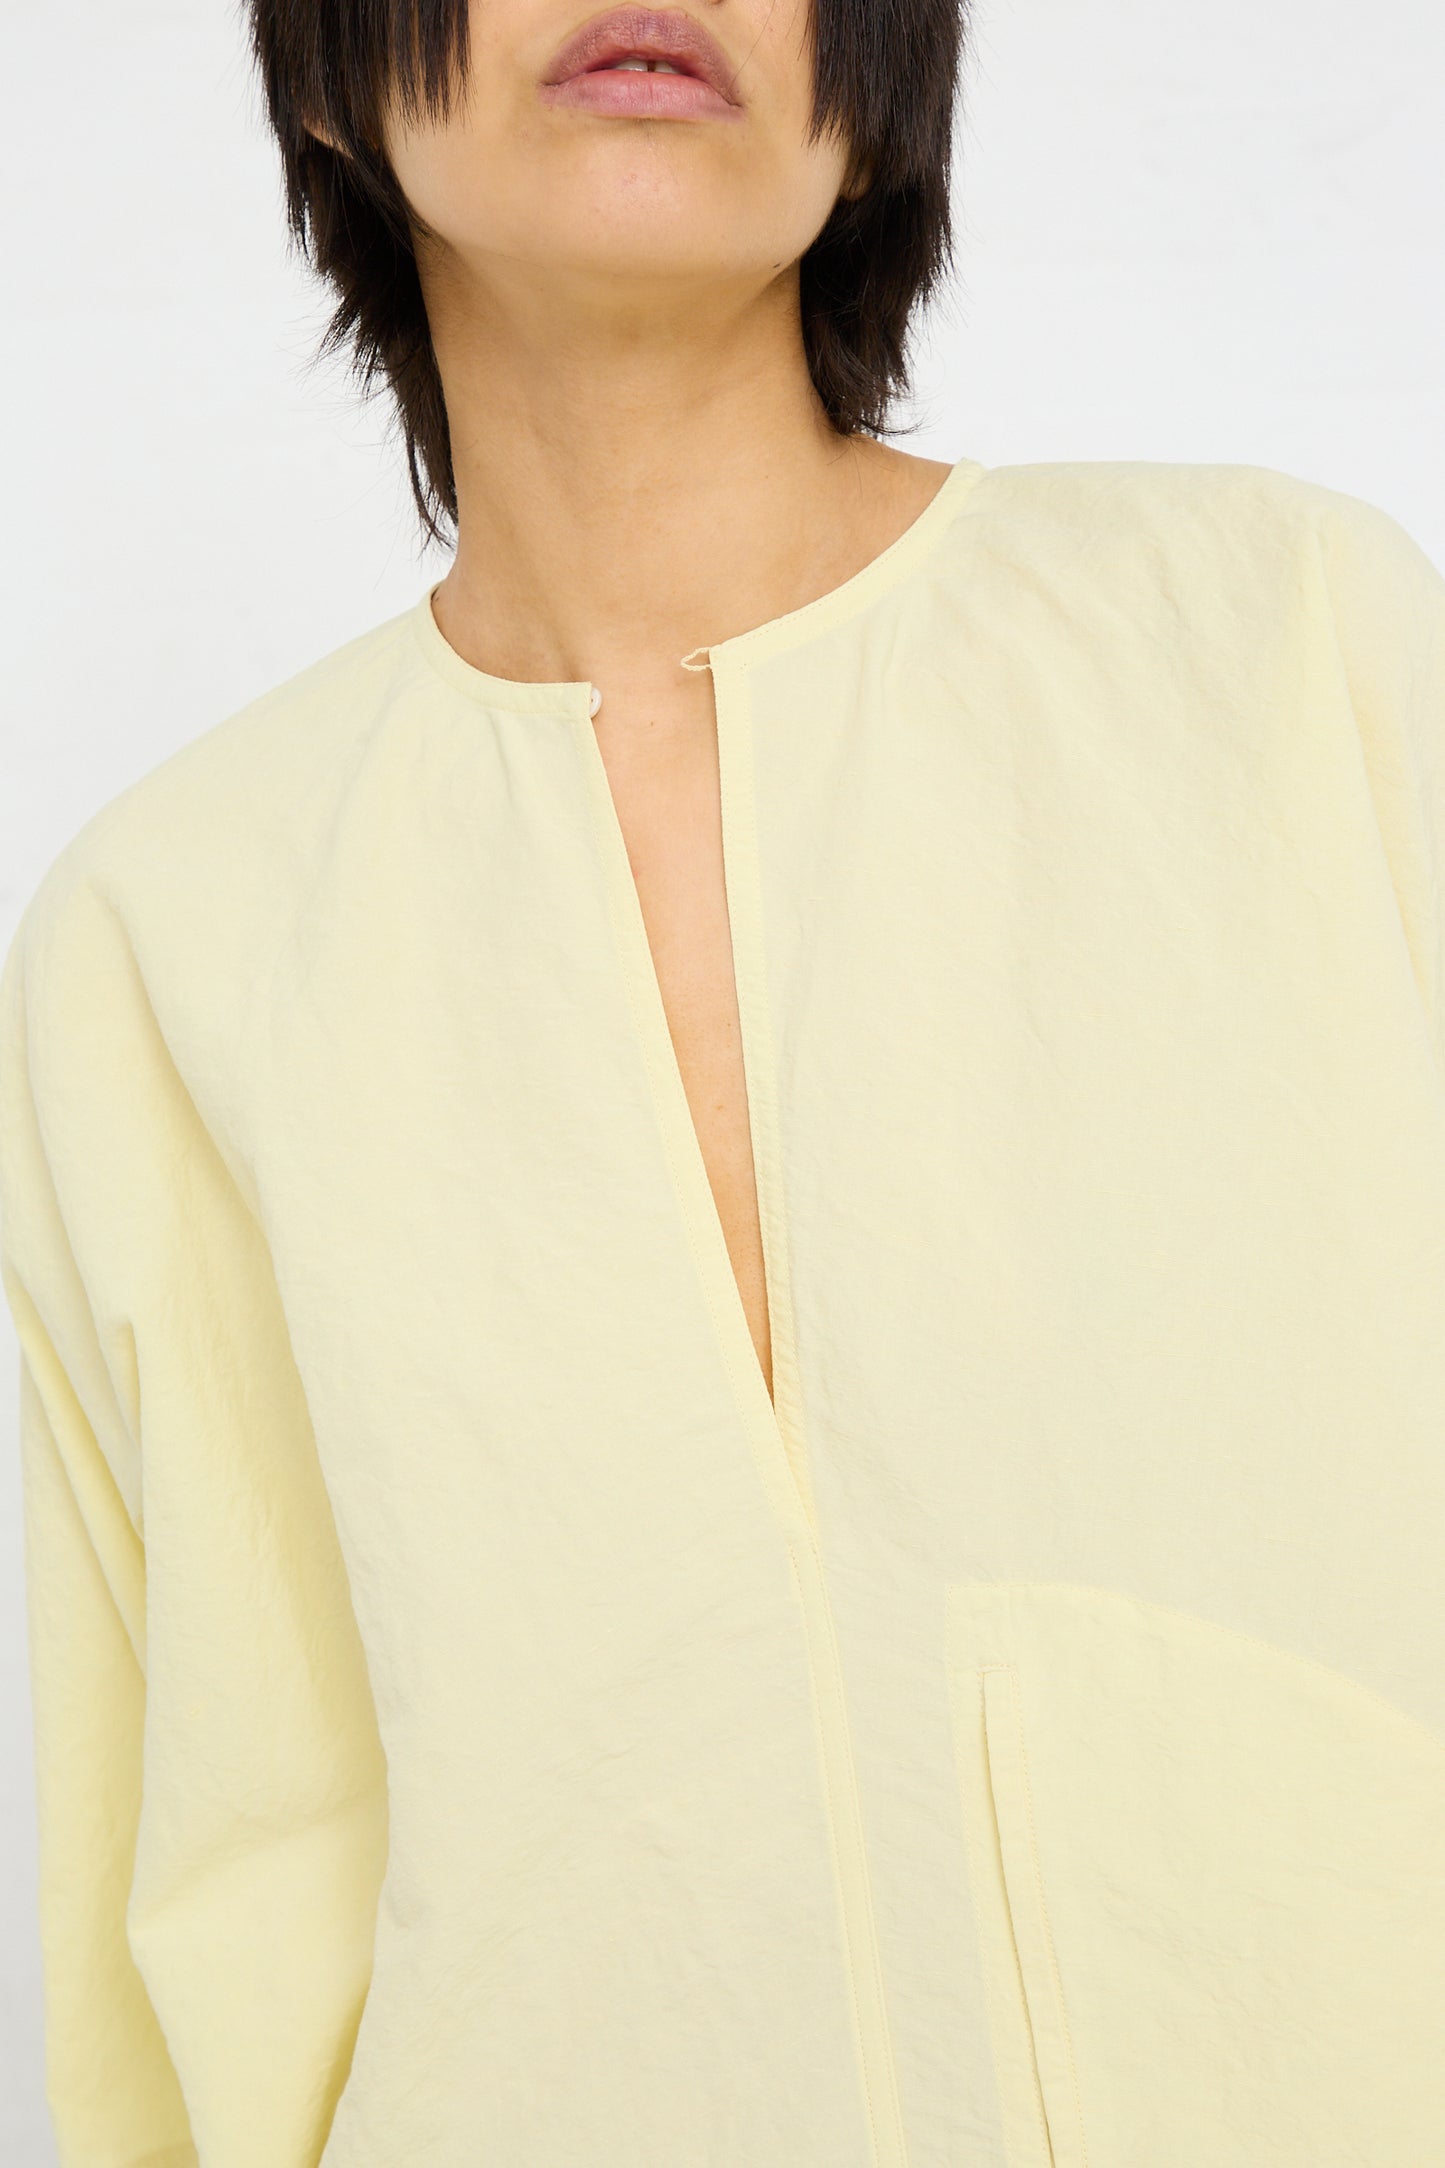 A person wearing an oversized yellow Linen Cotton Delfi Dress in Pastis made by Sofie D'Hoore, with a close-up on the neckline and upper chest.